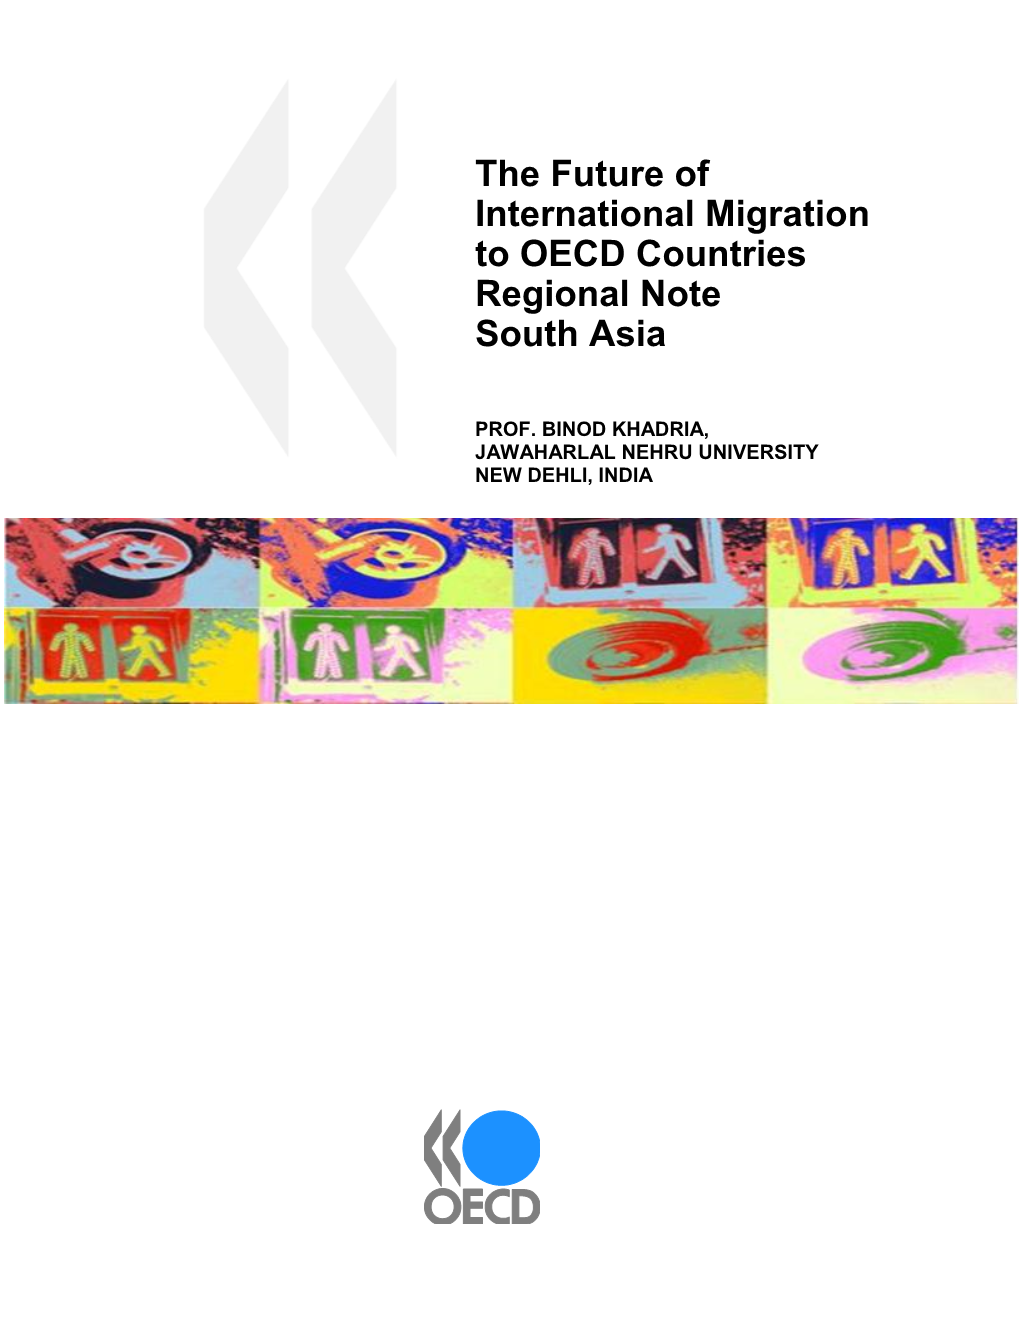 "The Future of International Migration To